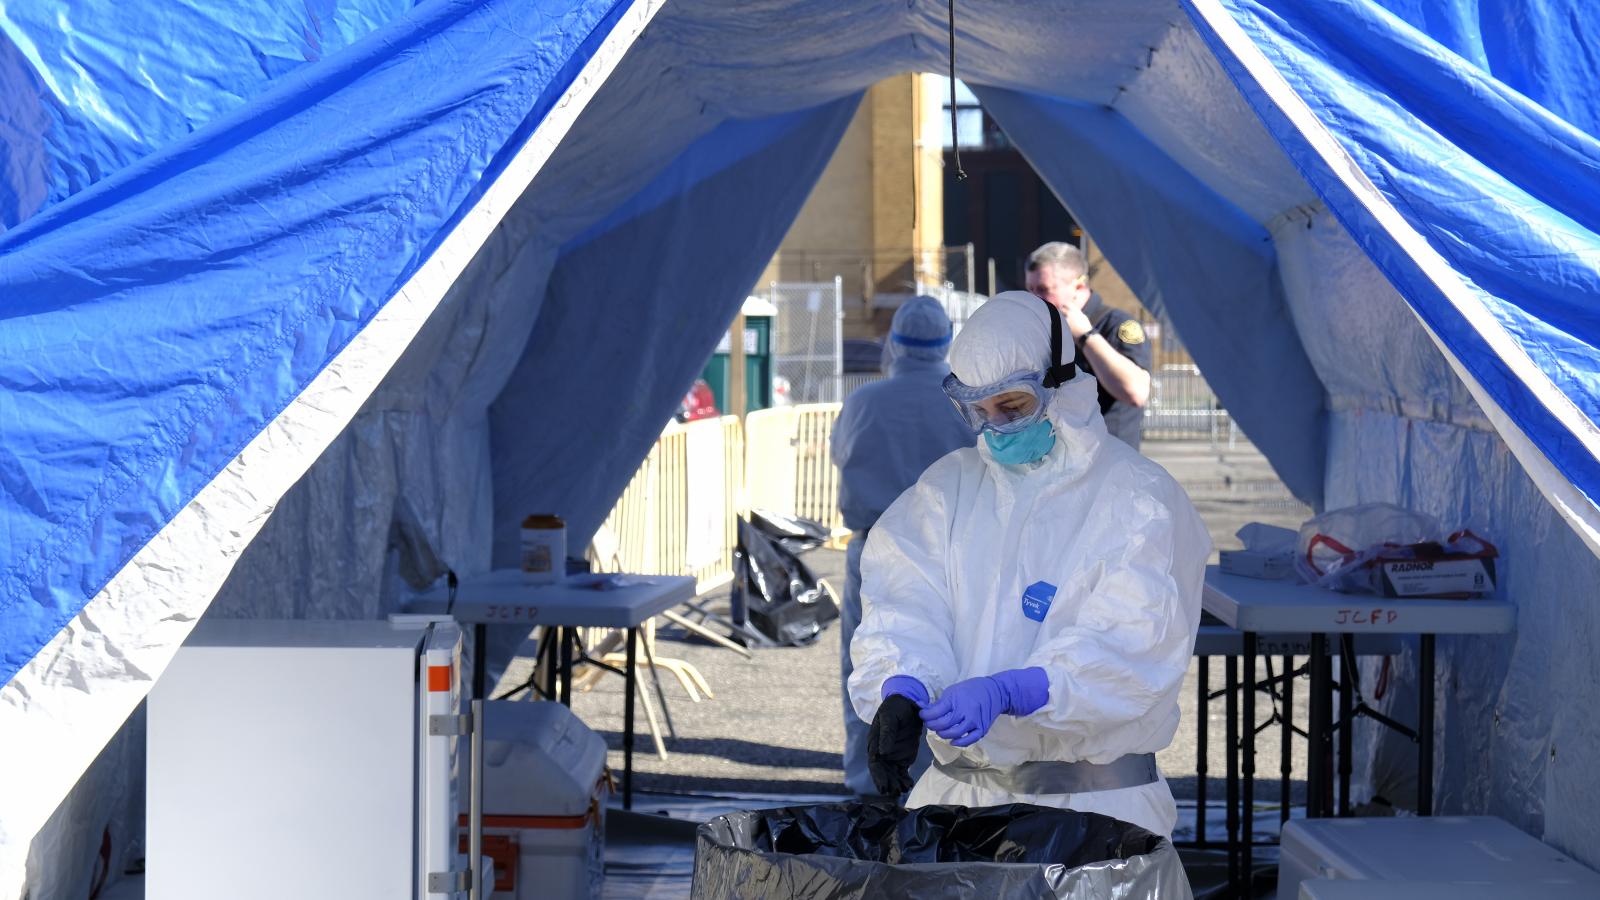 Image from Photojournalism - New York - April 6, 2020 - A coronavirus testing site is...